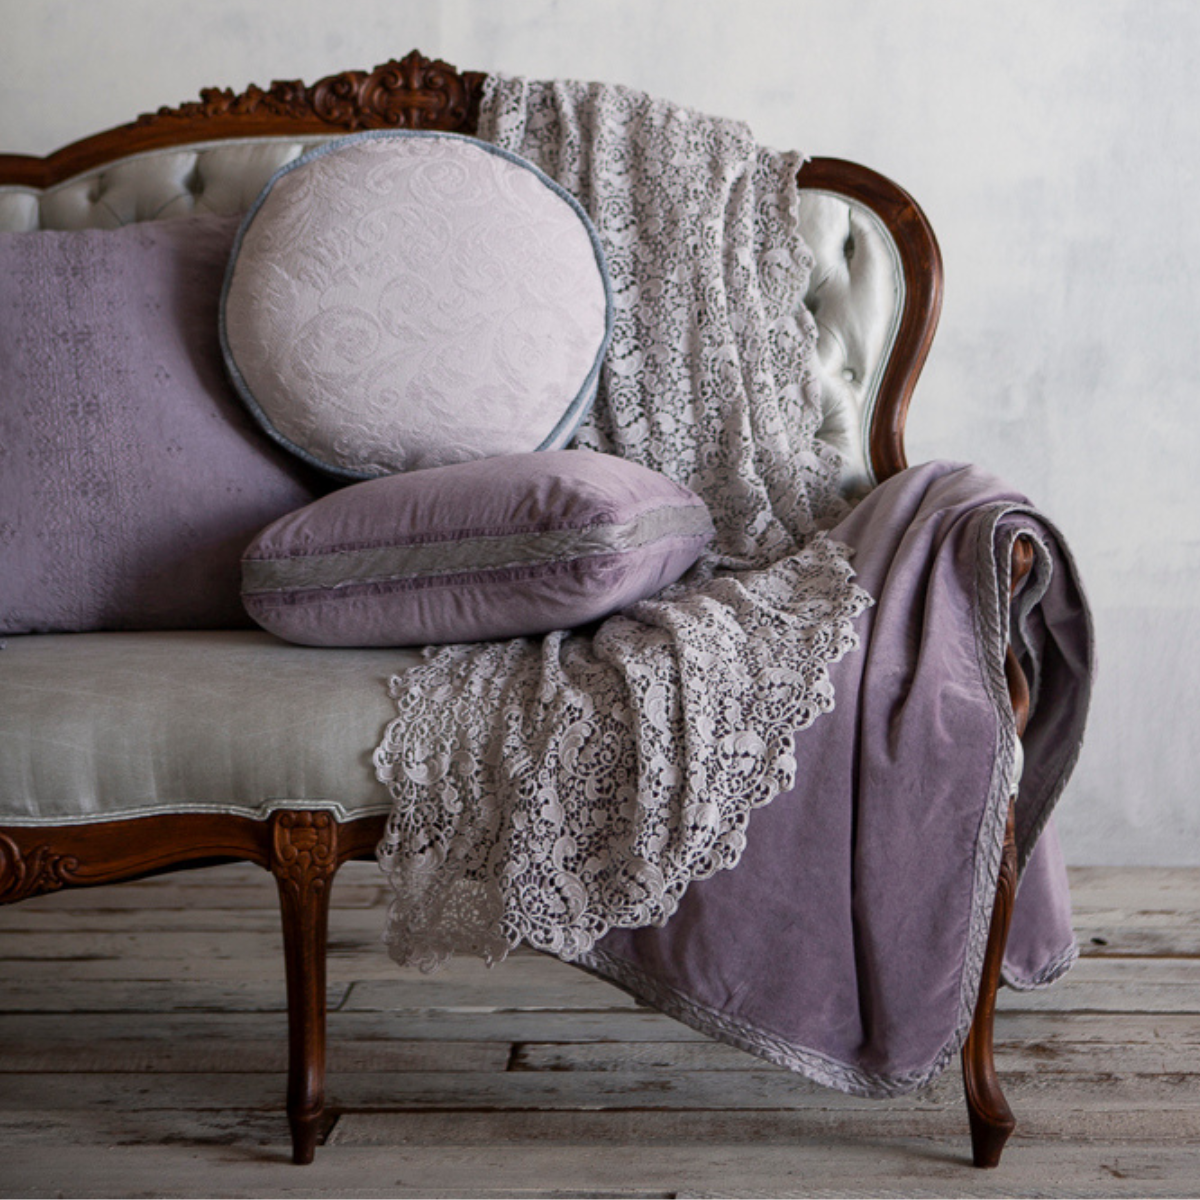 An antique sofa piled with throw pillows and blankets in french lavender and cloud